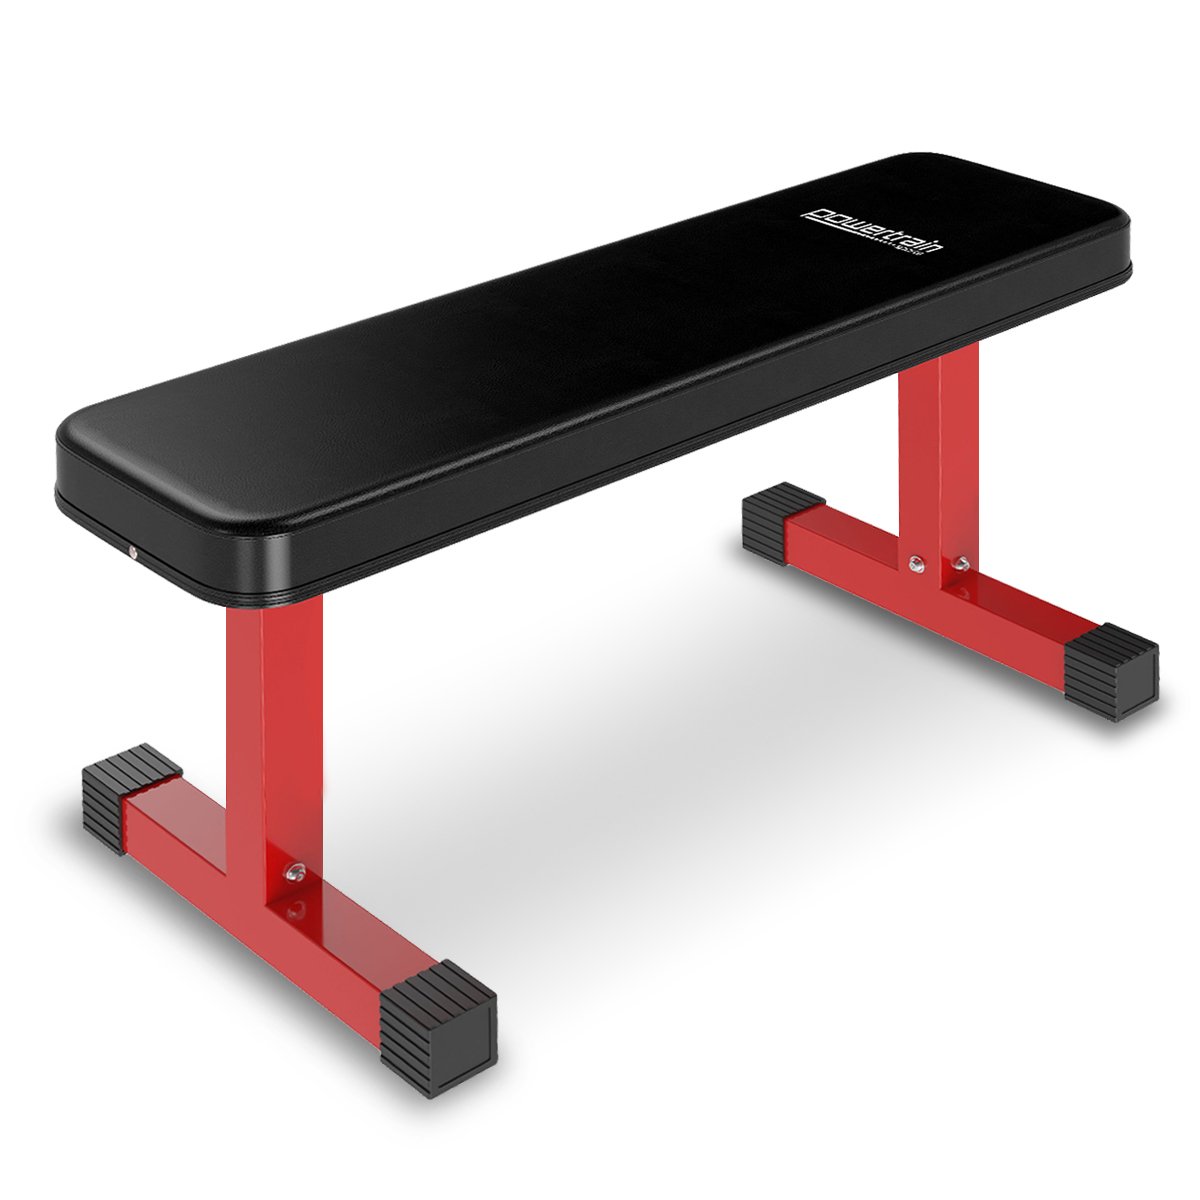 Home Gym Flat Bench Press Fitness Equipment